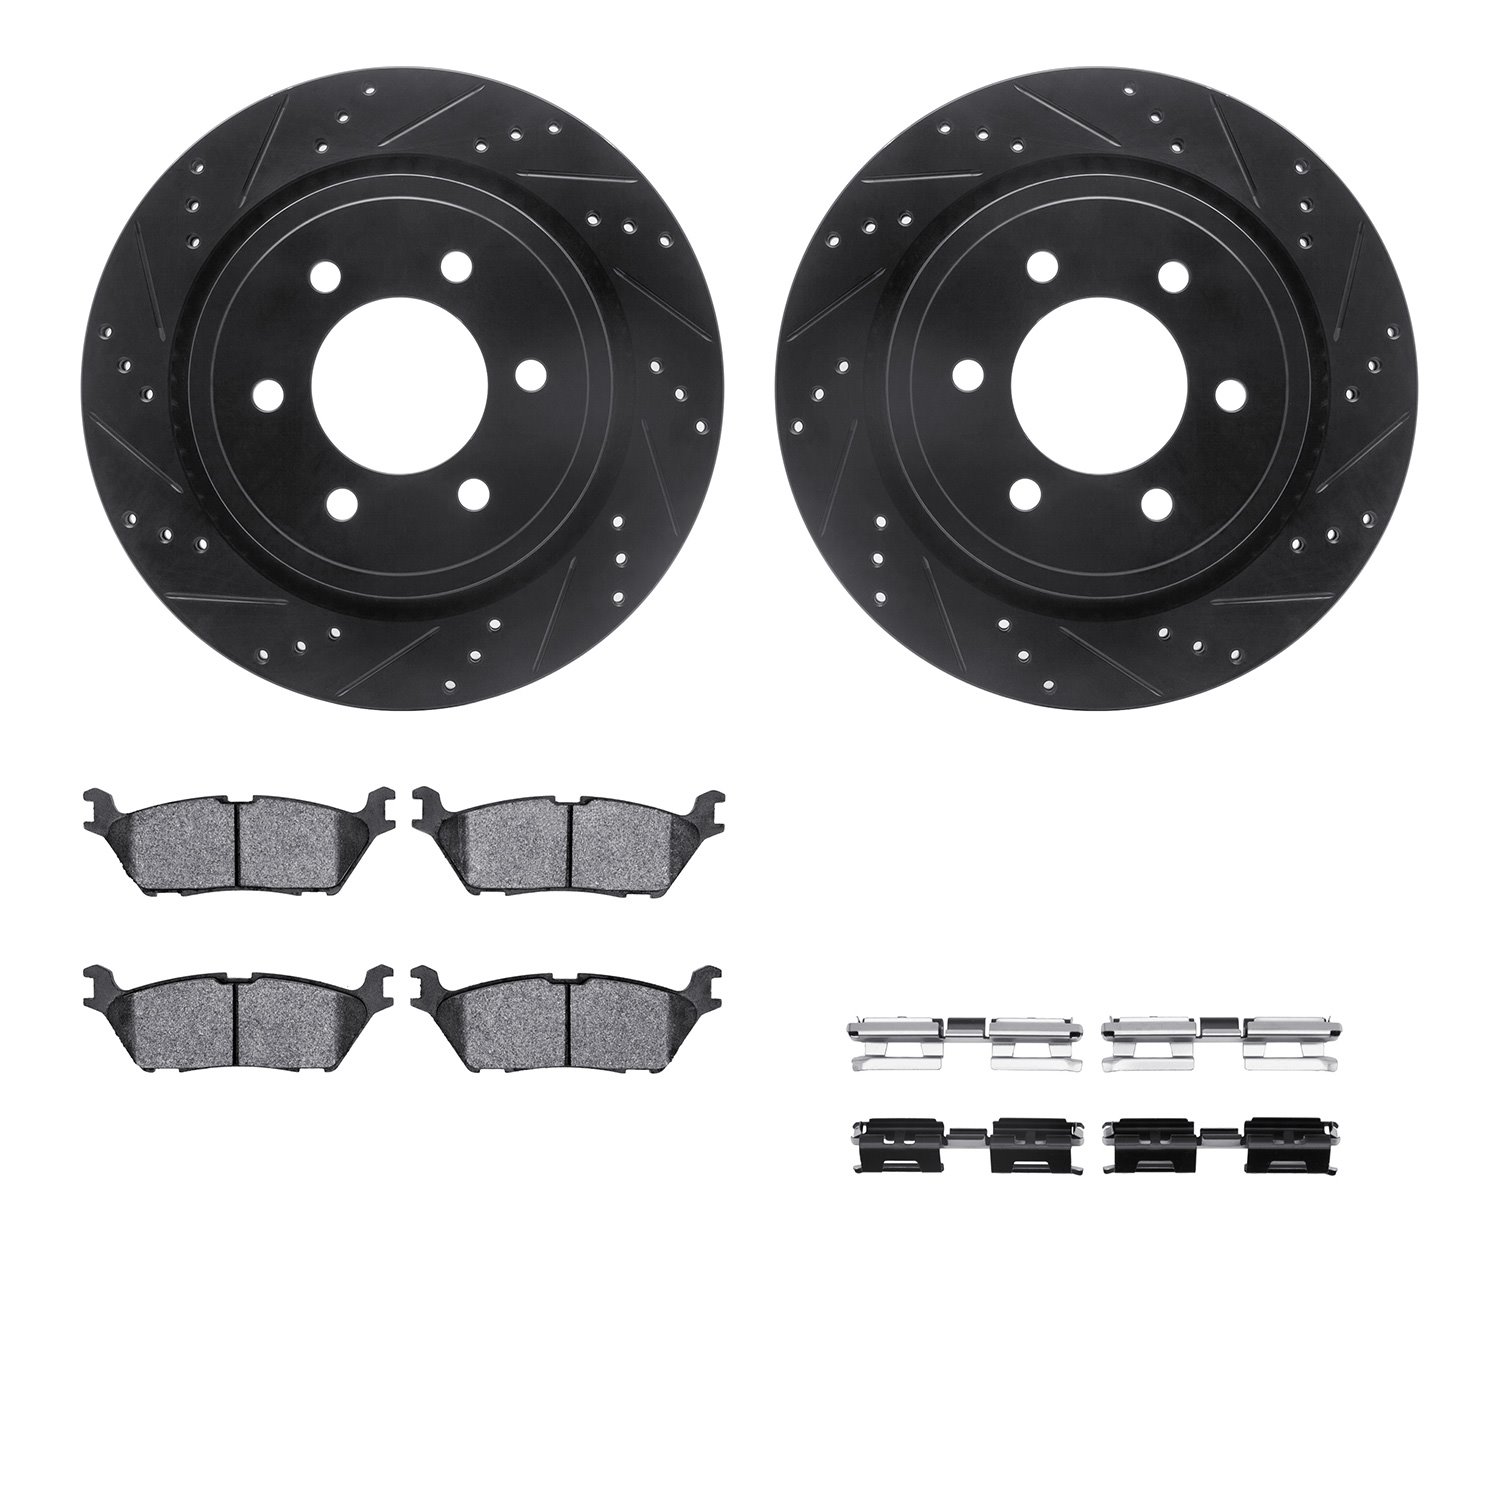 8412-54103 Drilled/Slotted Brake Rotors with Ultimate-Duty Brake Pads Kit & Hardware [Black], 2015-2017 Ford/Lincoln/Mercury/Maz